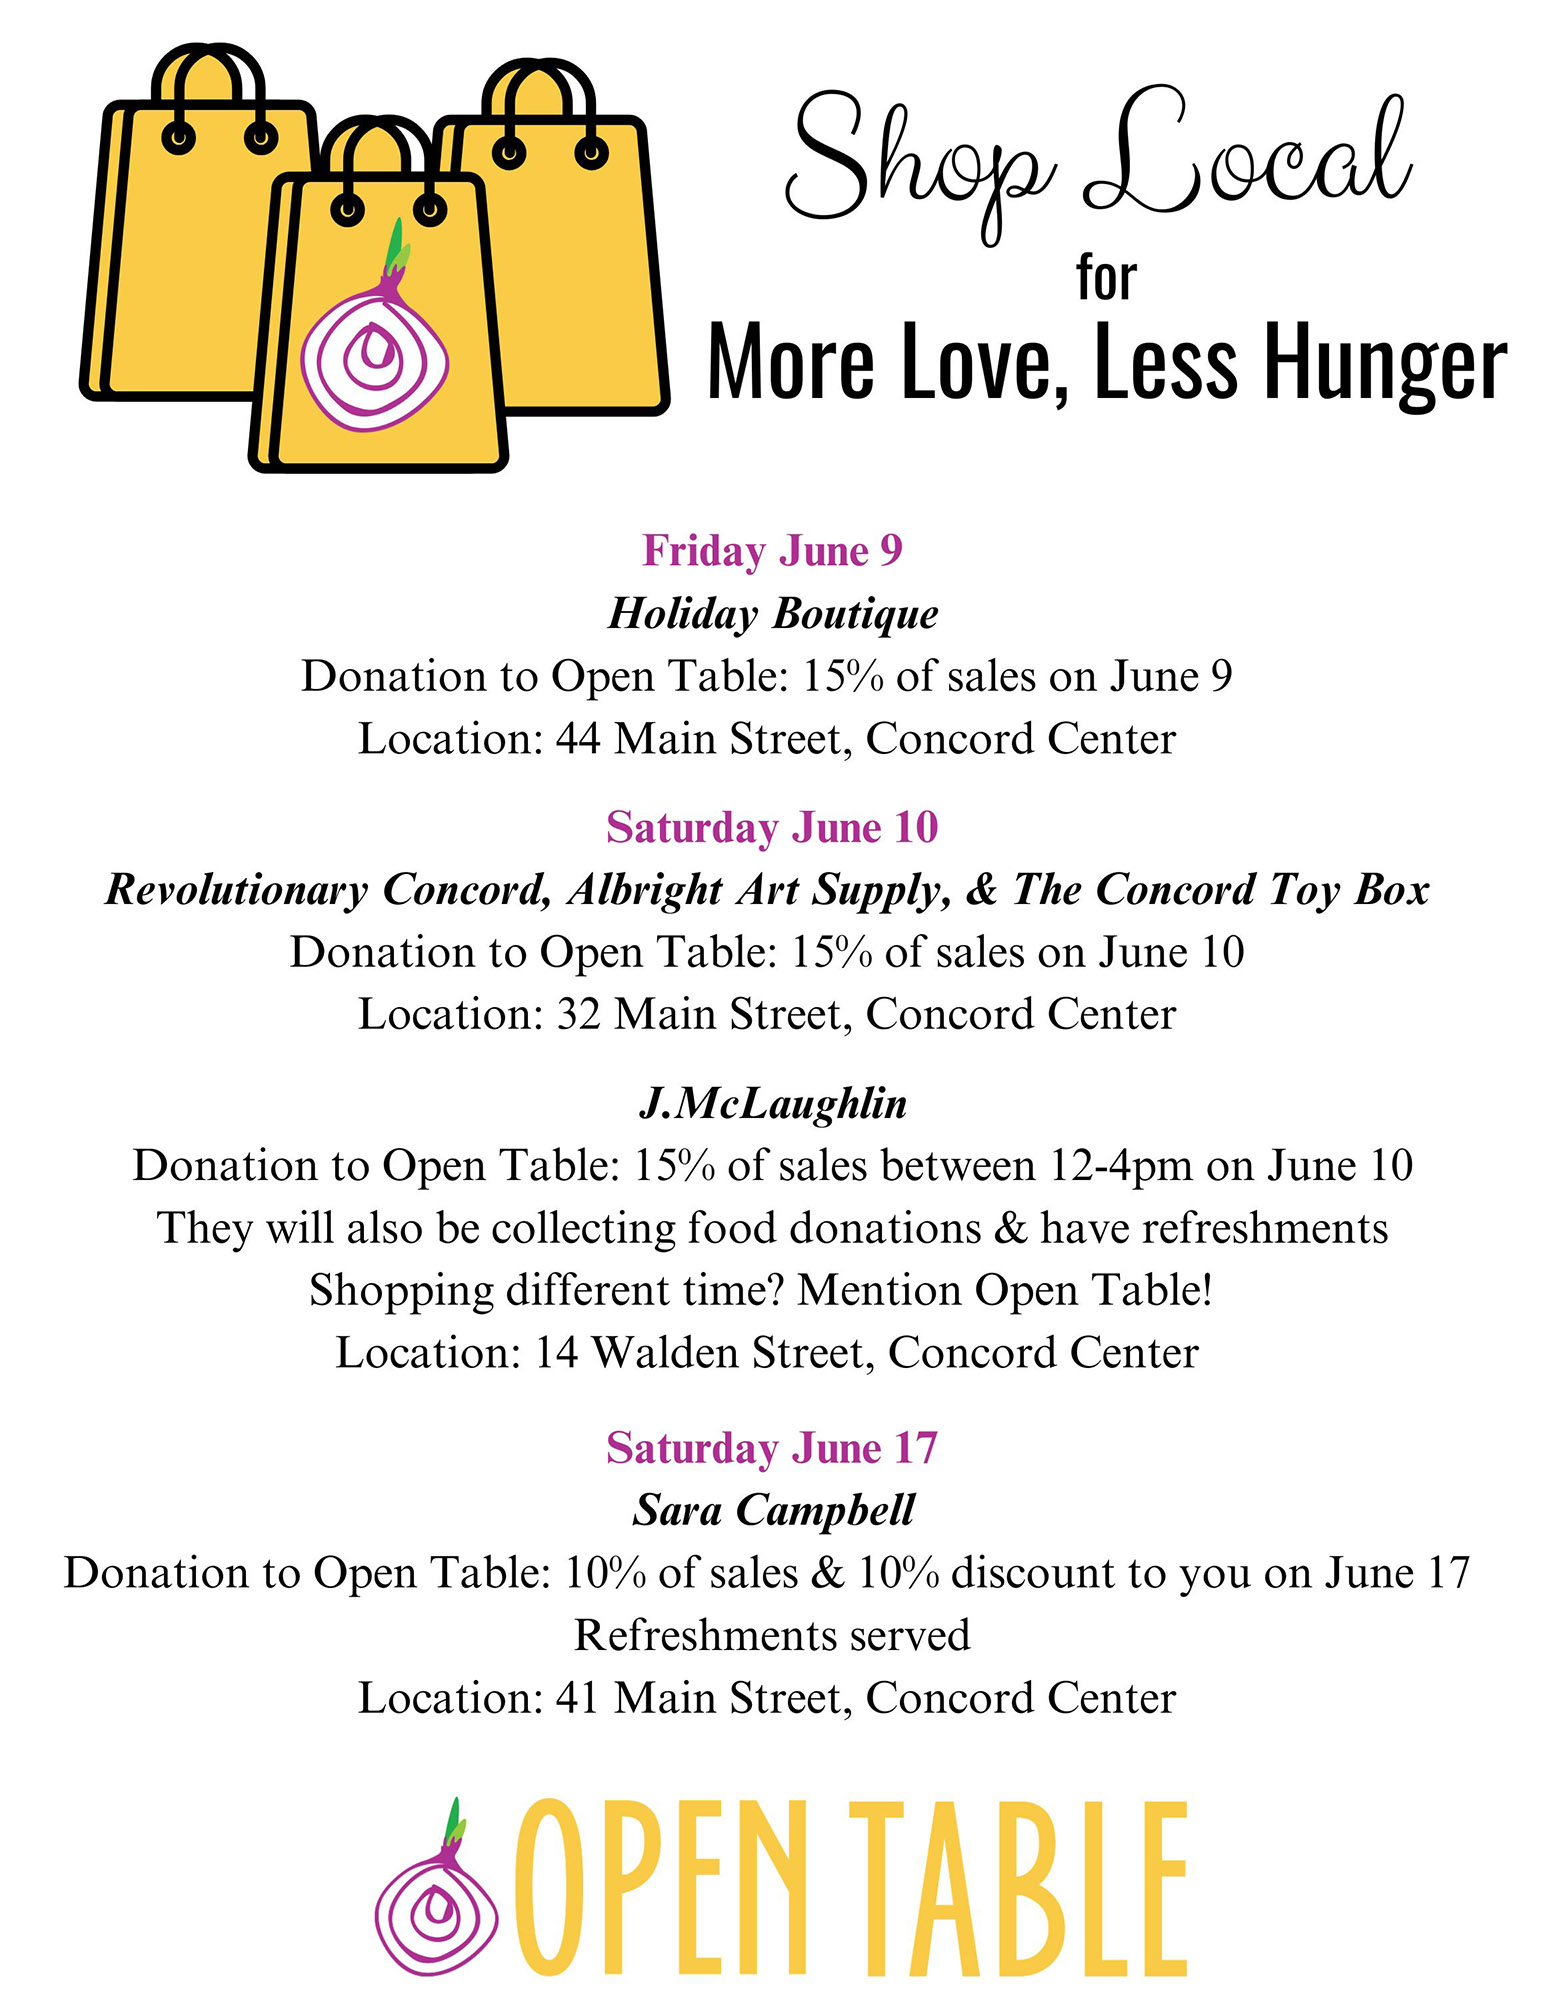 Shop local and support Open Table's mission this June